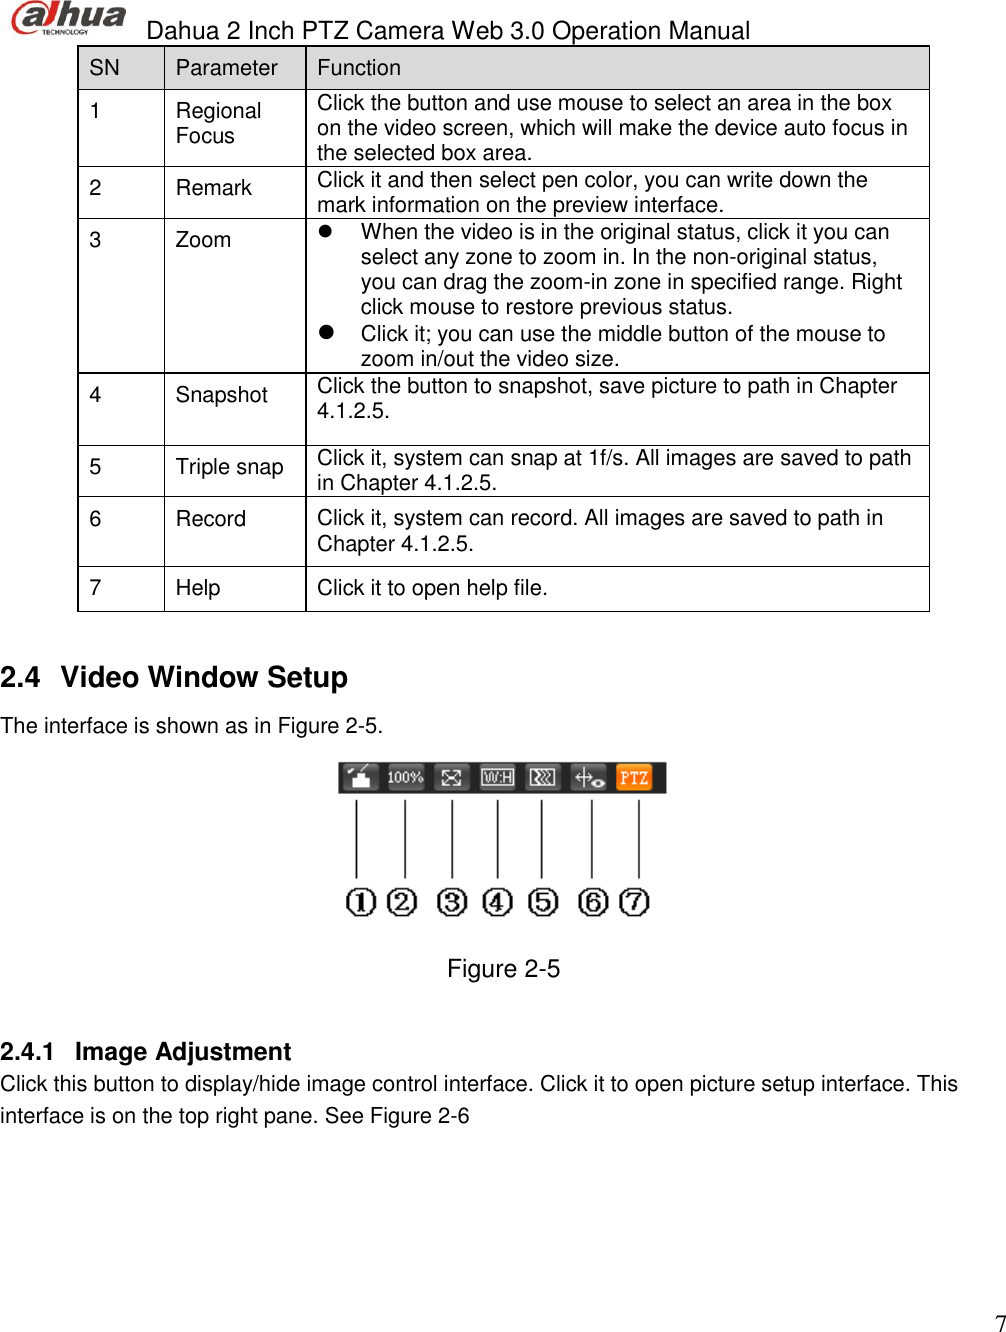  Dahua 2 Inch PTZ Camera Web 3.0 Operation Manual                                                                             7 SN Parameter Function  1 Regional Focus  Click the button and use mouse to select an area in the box on the video screen, which will make the device auto focus in the selected box area.    2 Remark  Click it and then select pen color, you can write down the mark information on the preview interface.  3 Zoom    When the video is in the original status, click it you can select any zone to zoom in. In the non-original status, you can drag the zoom-in zone in specified range. Right click mouse to restore previous status.   Click it; you can use the middle button of the mouse to zoom in/out the video size.  4 Snapshot Click the button to snapshot, save picture to path in Chapter 4.1.2.5. 5 Triple snap  Click it, system can snap at 1f/s. All images are saved to path in Chapter 4.1.2.5. 6 Record Click it, system can record. All images are saved to path in Chapter 4.1.2.5. 7 Help  Click it to open help file.   2.4  Video Window Setup   The interface is shown as in Figure 2-5.  Figure 2-5  2.4.1  Image Adjustment Click this button to display/hide image control interface. Click it to open picture setup interface. This interface is on the top right pane. See Figure 2-6    